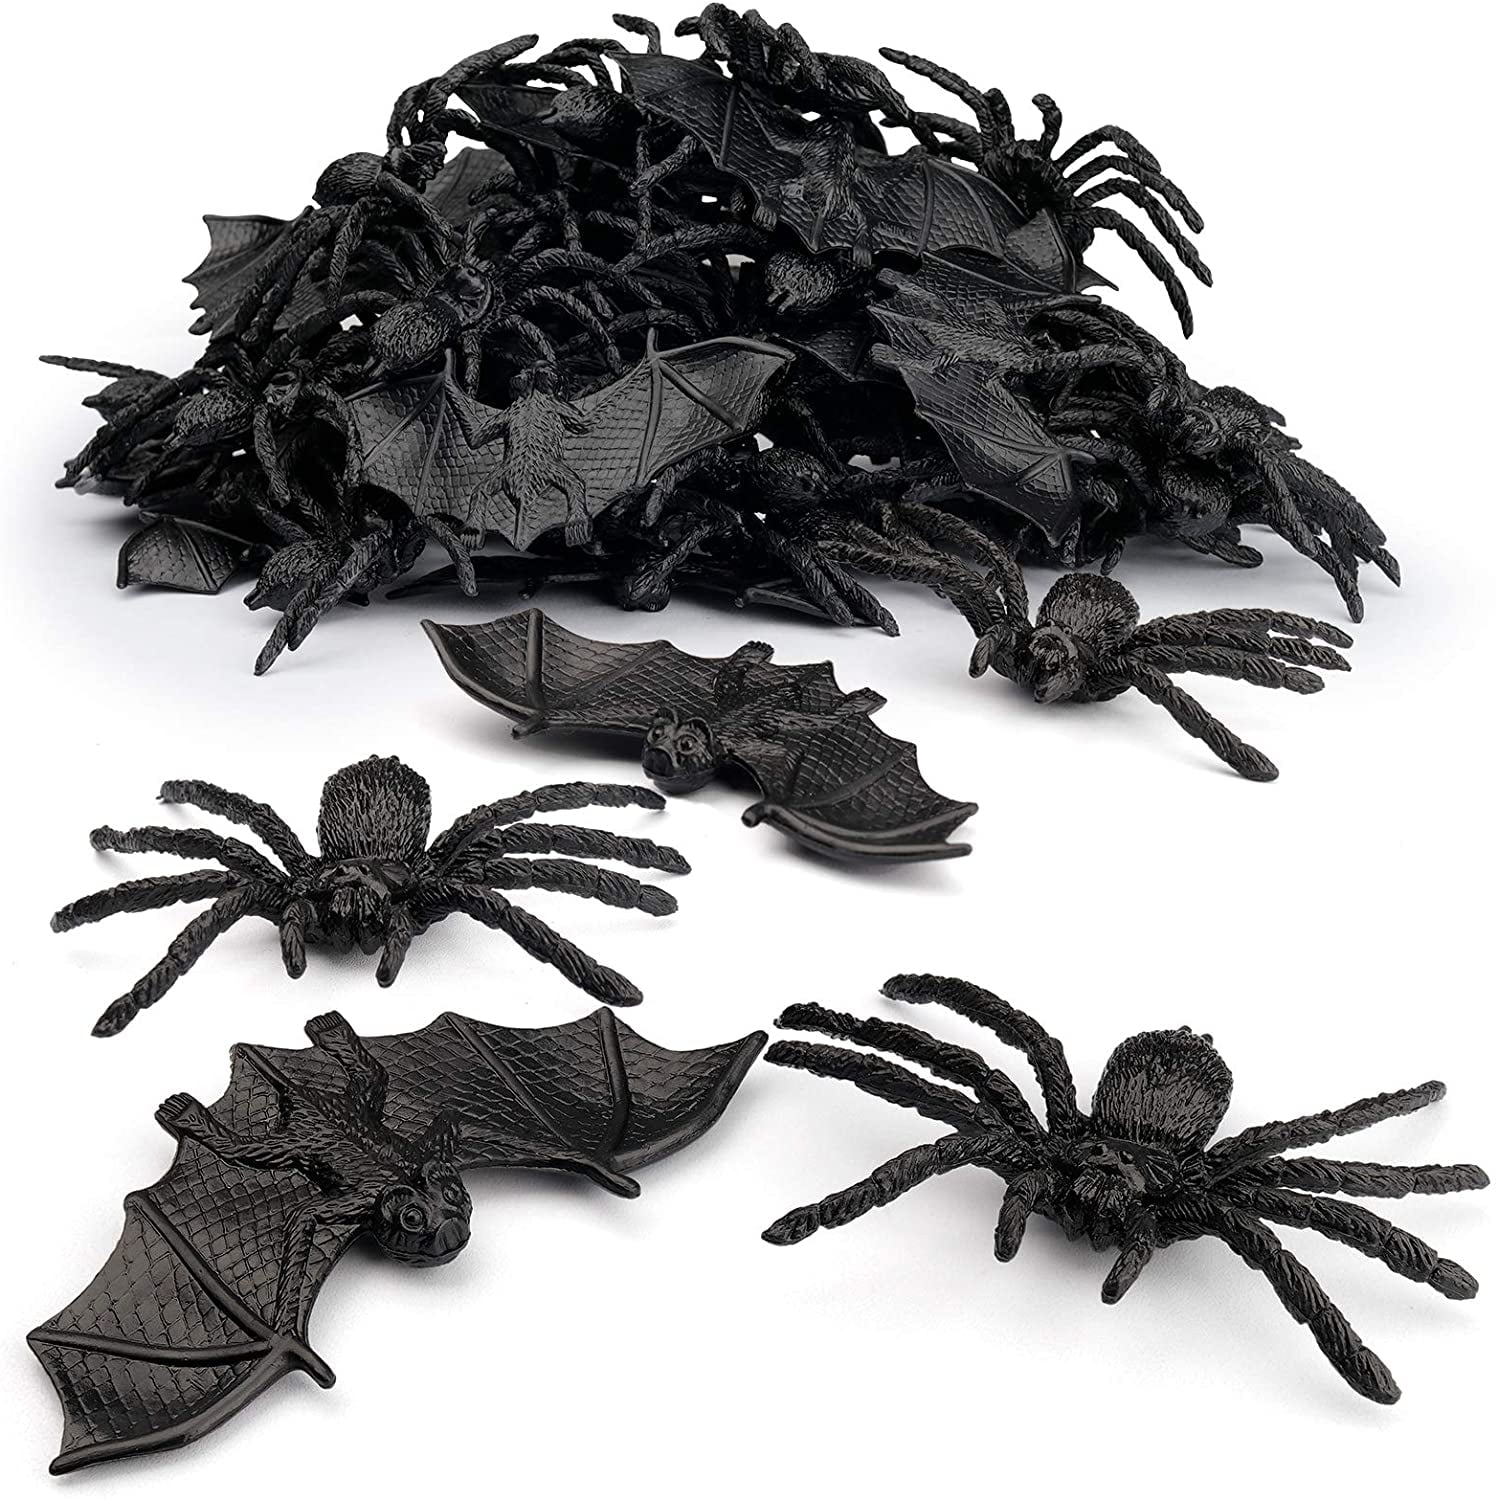 12 NEW TOY SPIDERS FAKE CREEPY SPIDER HALLOWEEN PROP 2" SIZE PARTY FAVOR PRANK 